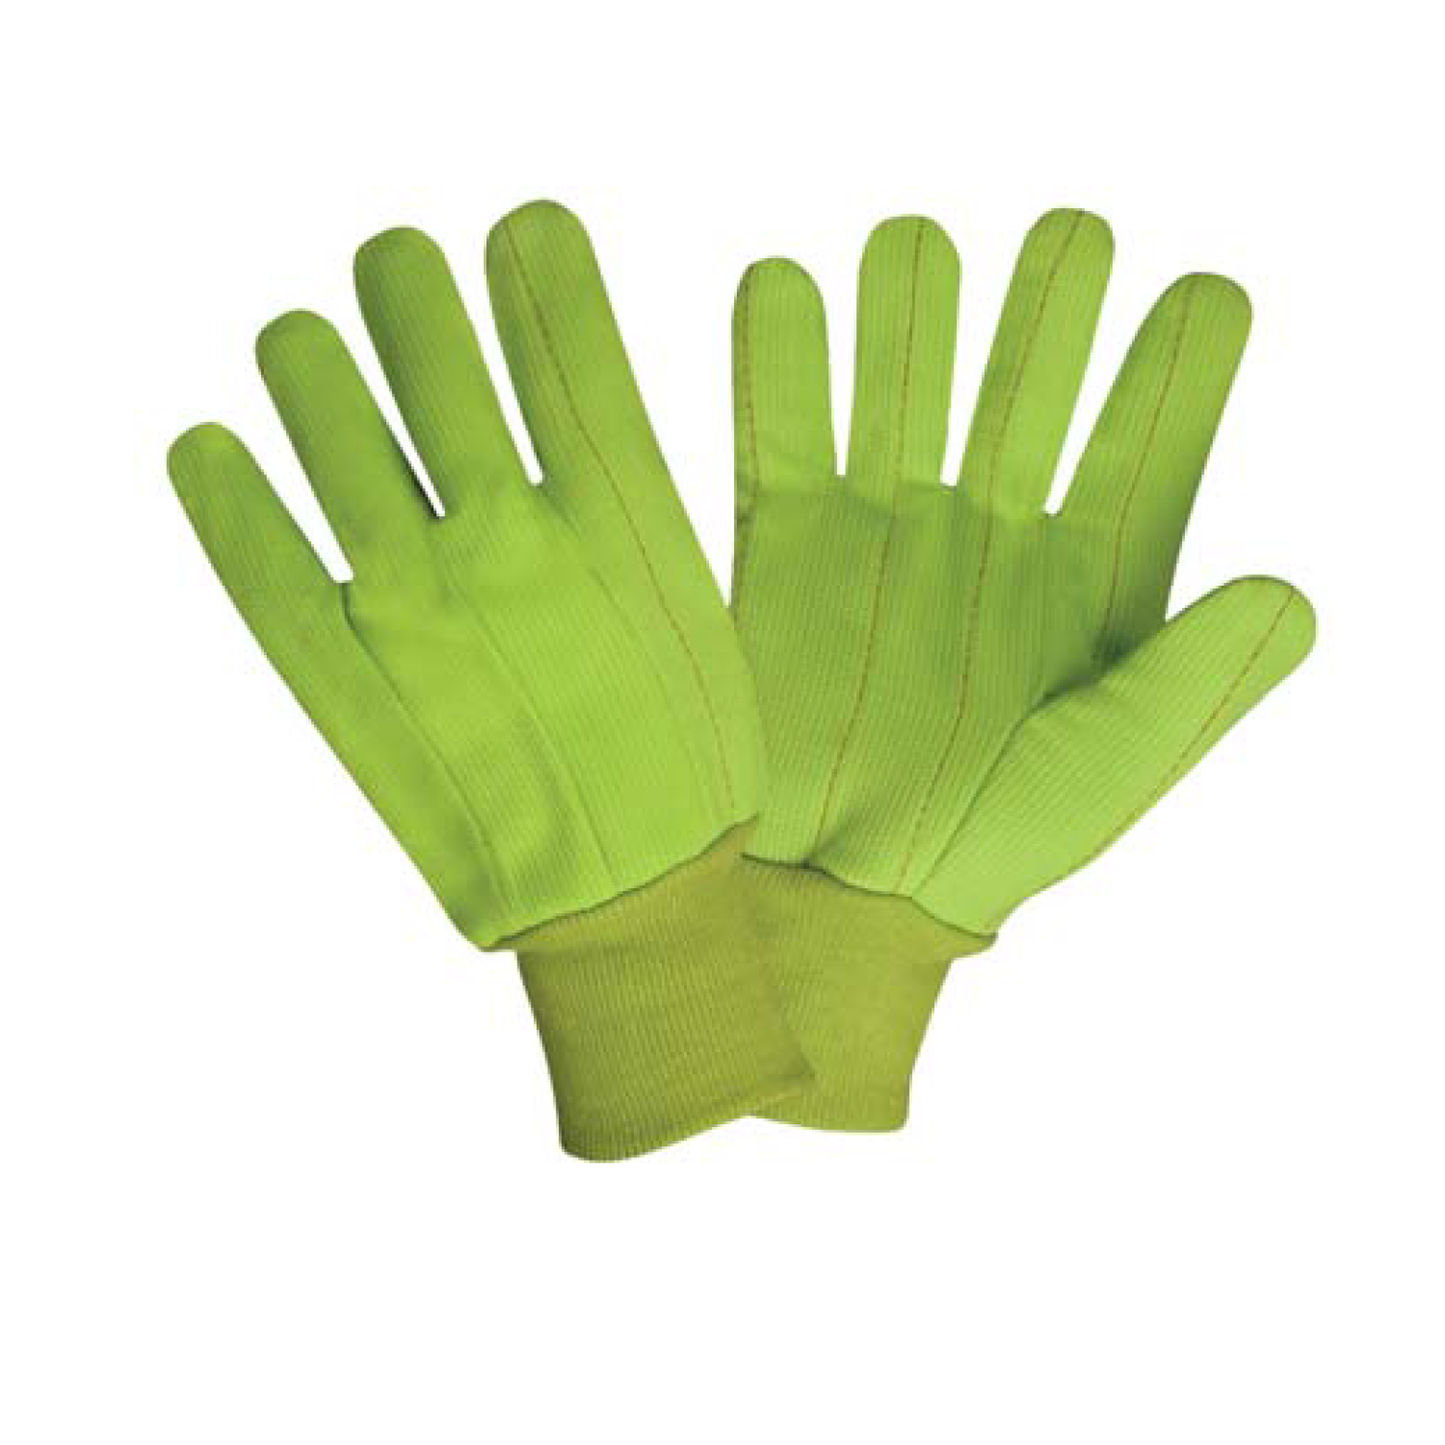 High-Visibility Lime, Cotton Gloves, Large, 12-Pack